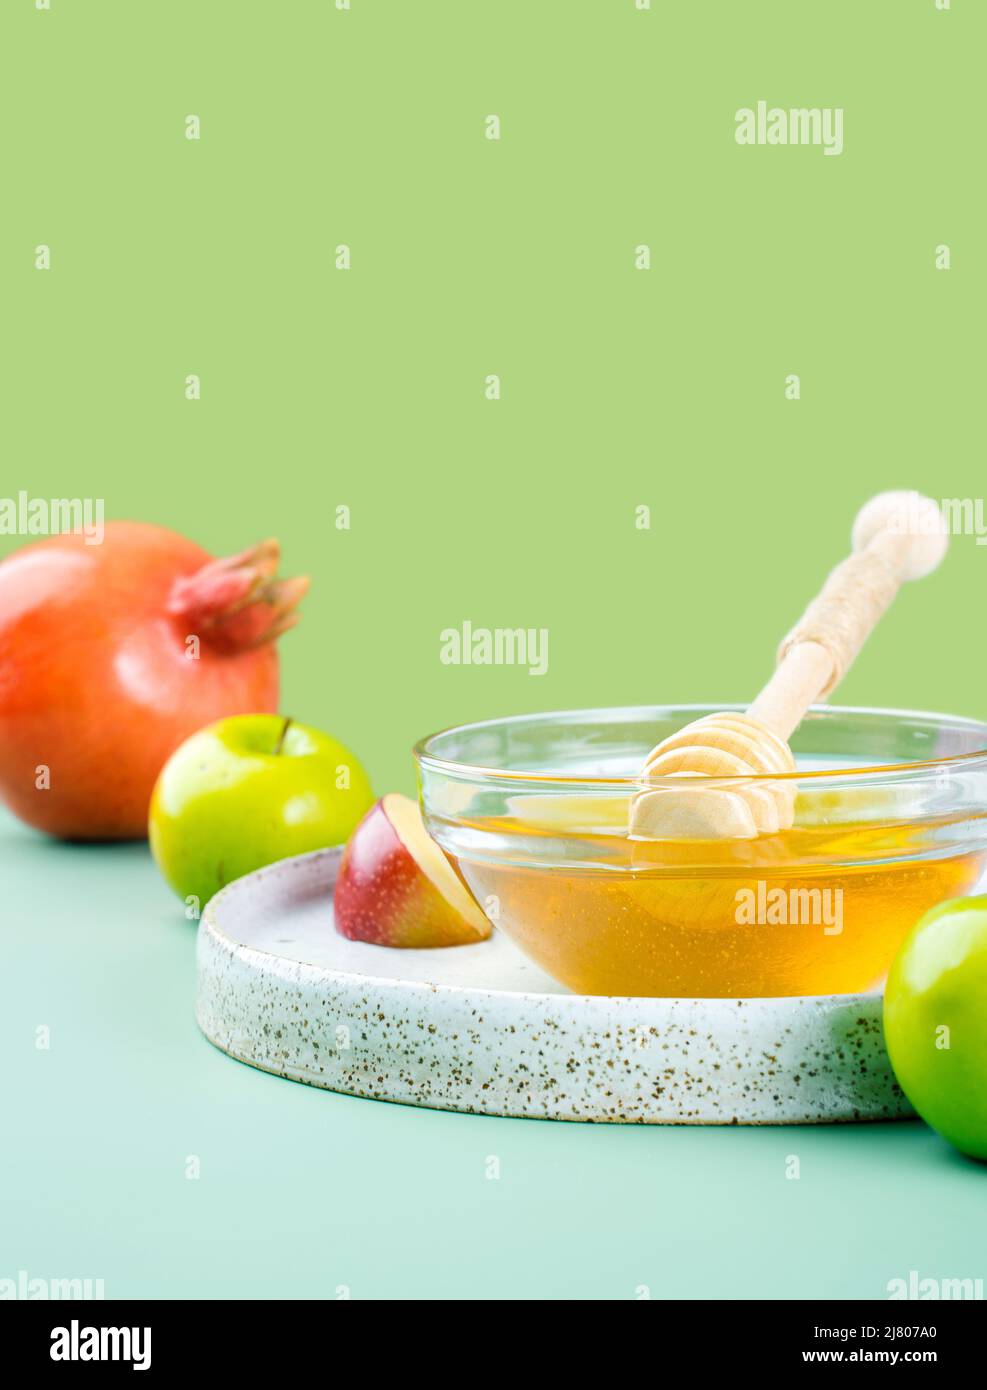 glass saucer with fresh honey, honey spoon, apple and pomegranate on a bright green background. Concept Jewish New Year Happy holiday Rosh Hashanah Stock Photo